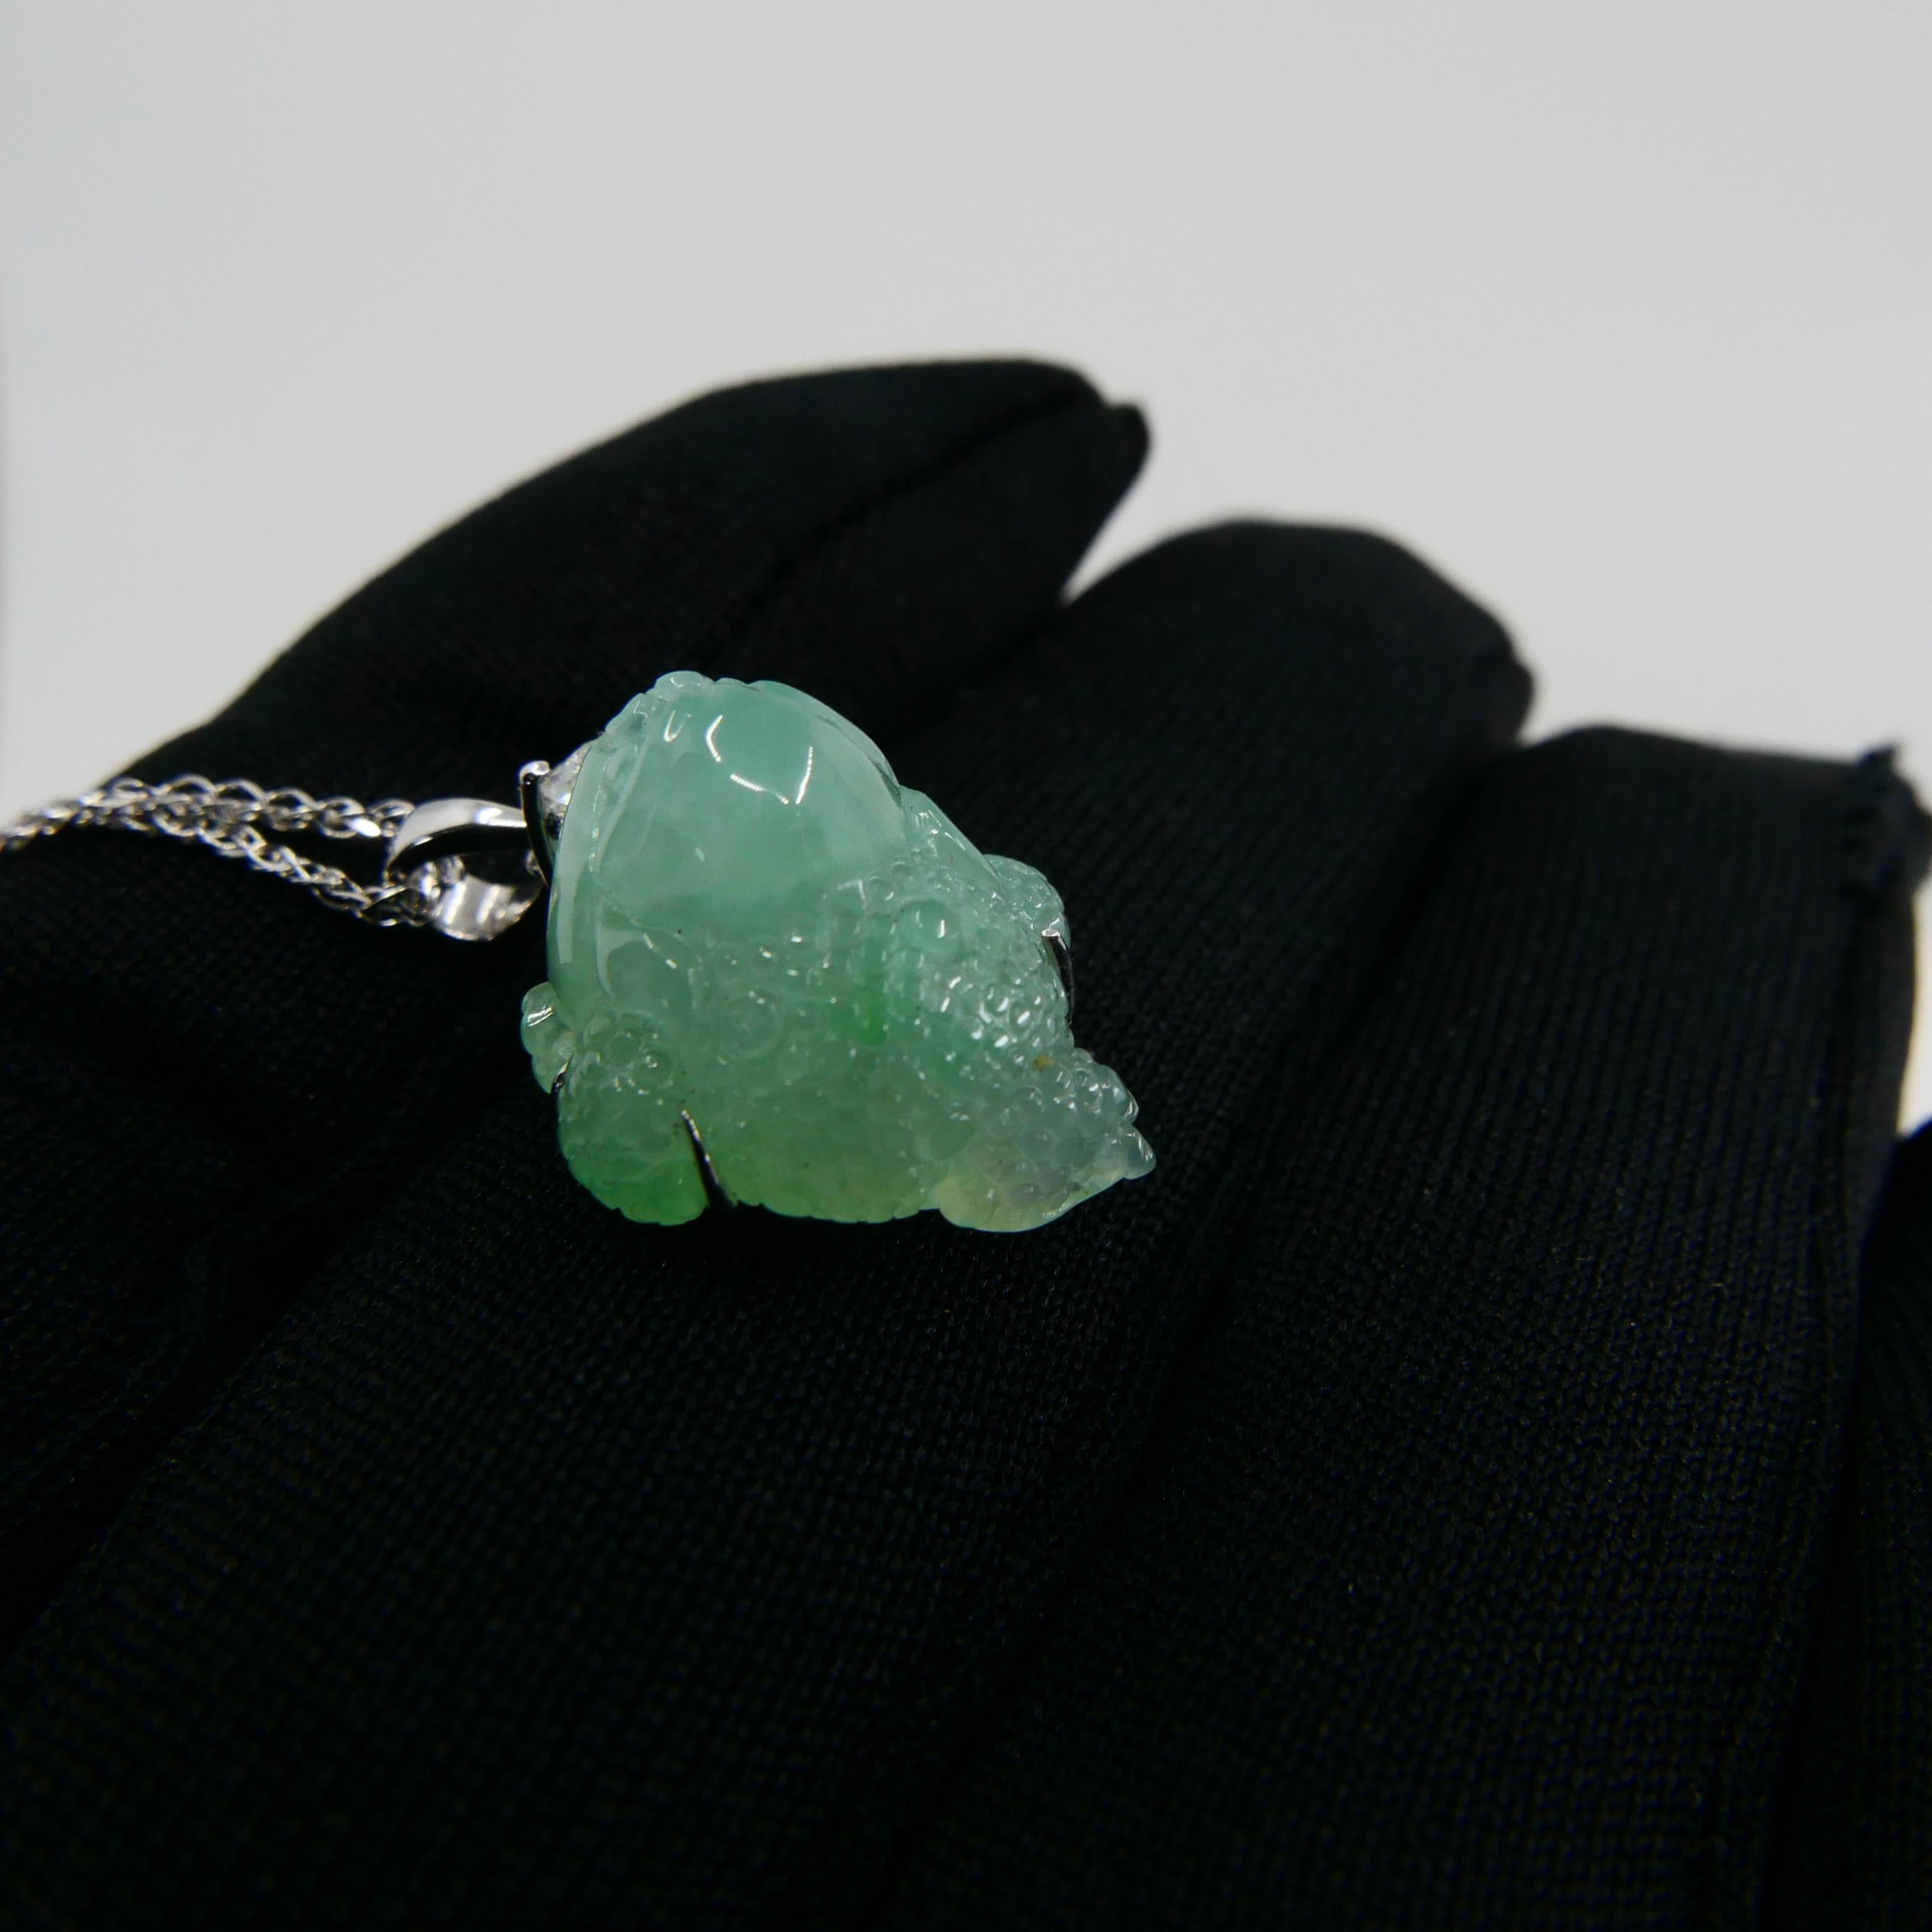 Certified Type A Jade Mythical Beast Drop Pendant Necklace, Icy Green 12